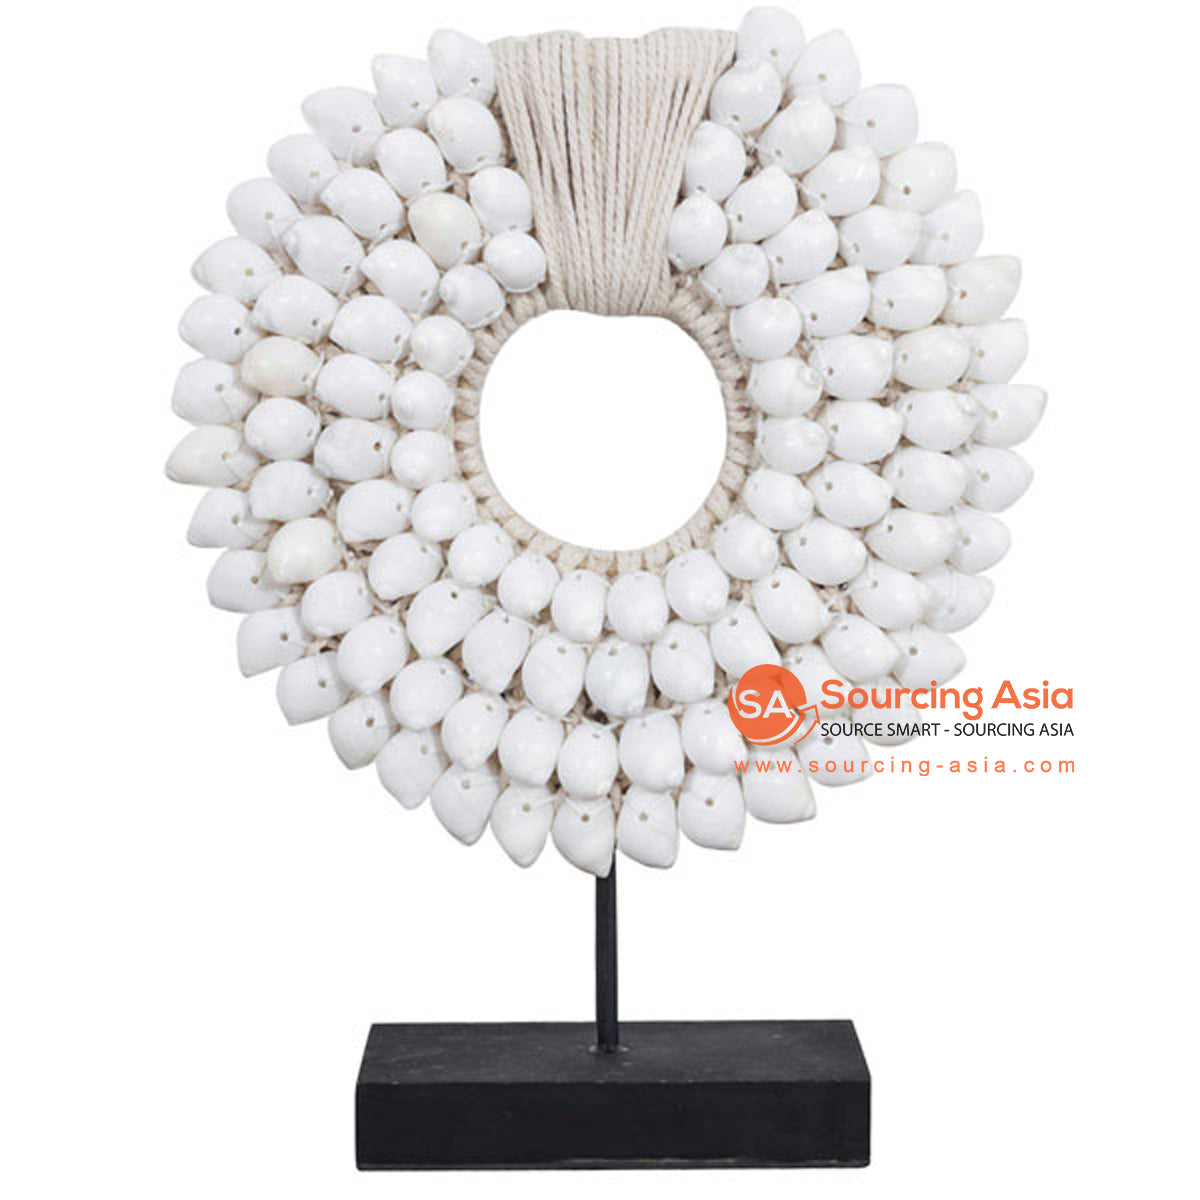 SHL169 NATURAL SHELL NECKLACE ON STAND DECORATION